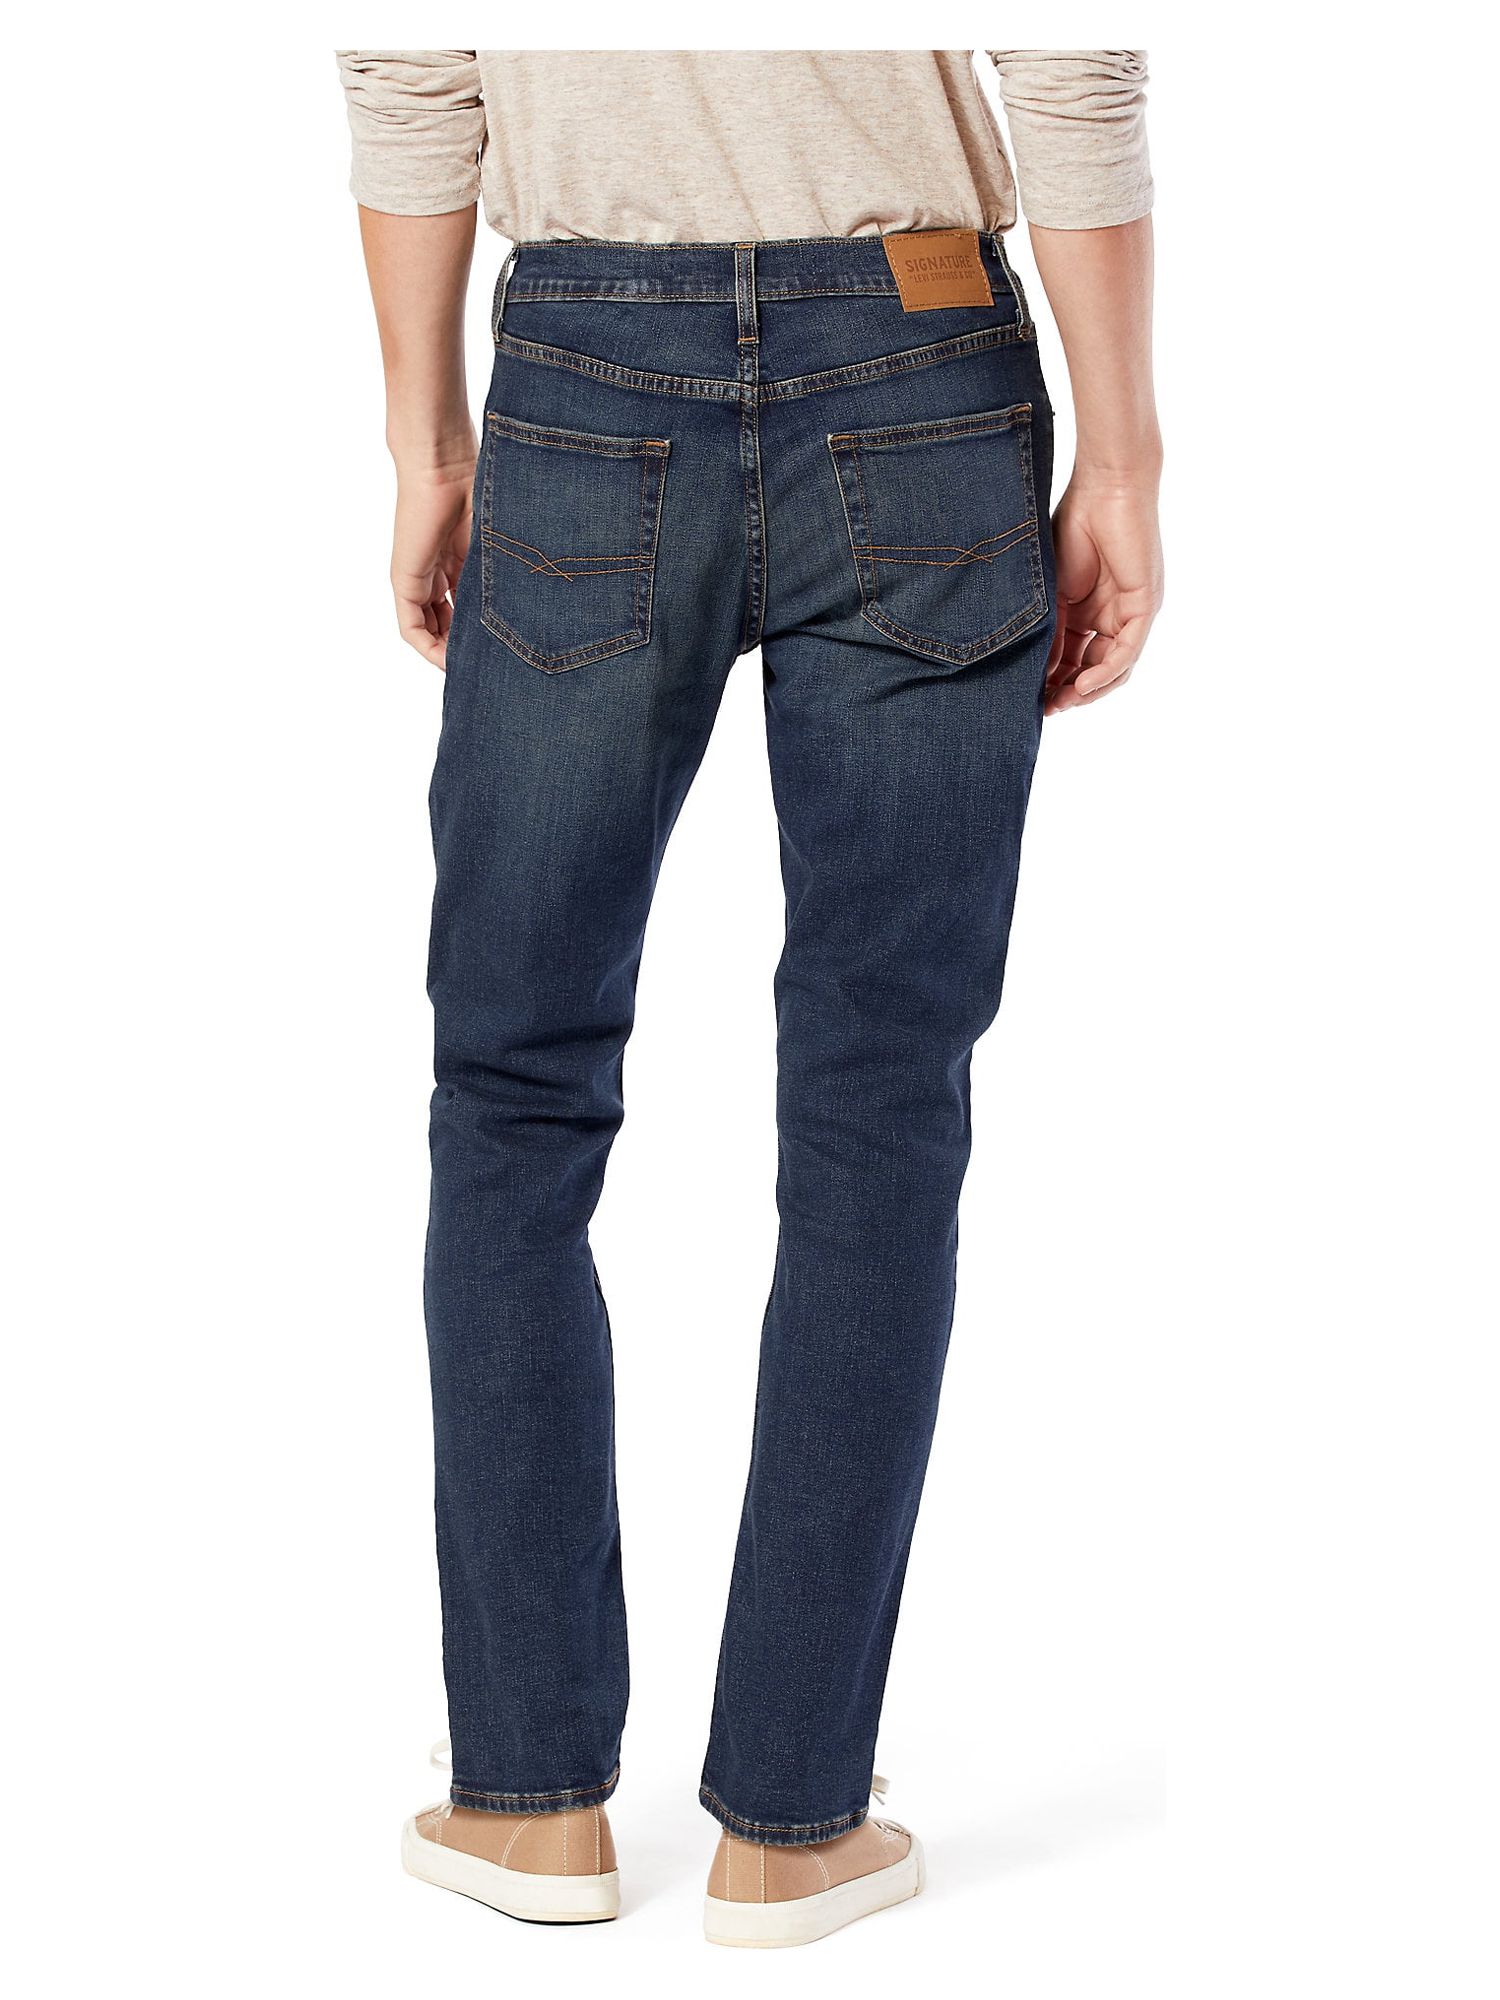 Signature by Levi Strauss & Co. Men's and Big Men's Slim Fit Jeans - image 4 of 5